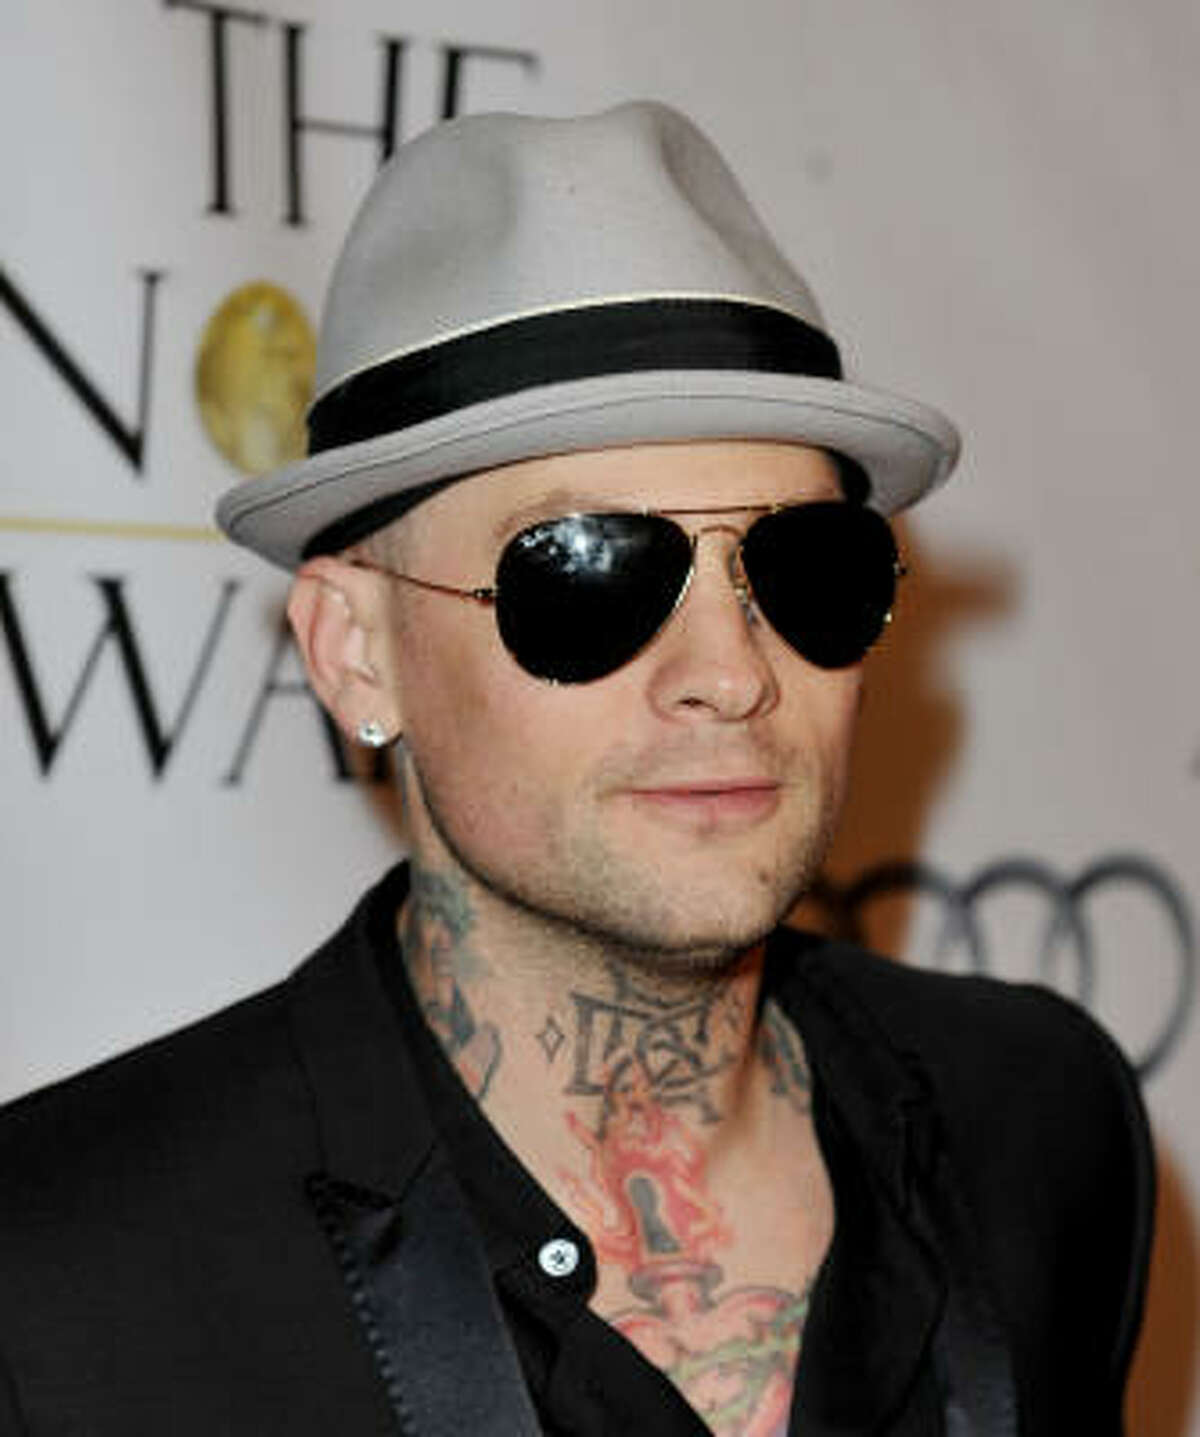 Benji Madden of Good Charlotte and Paris Hilton dating fame has multiple neck tattoos.